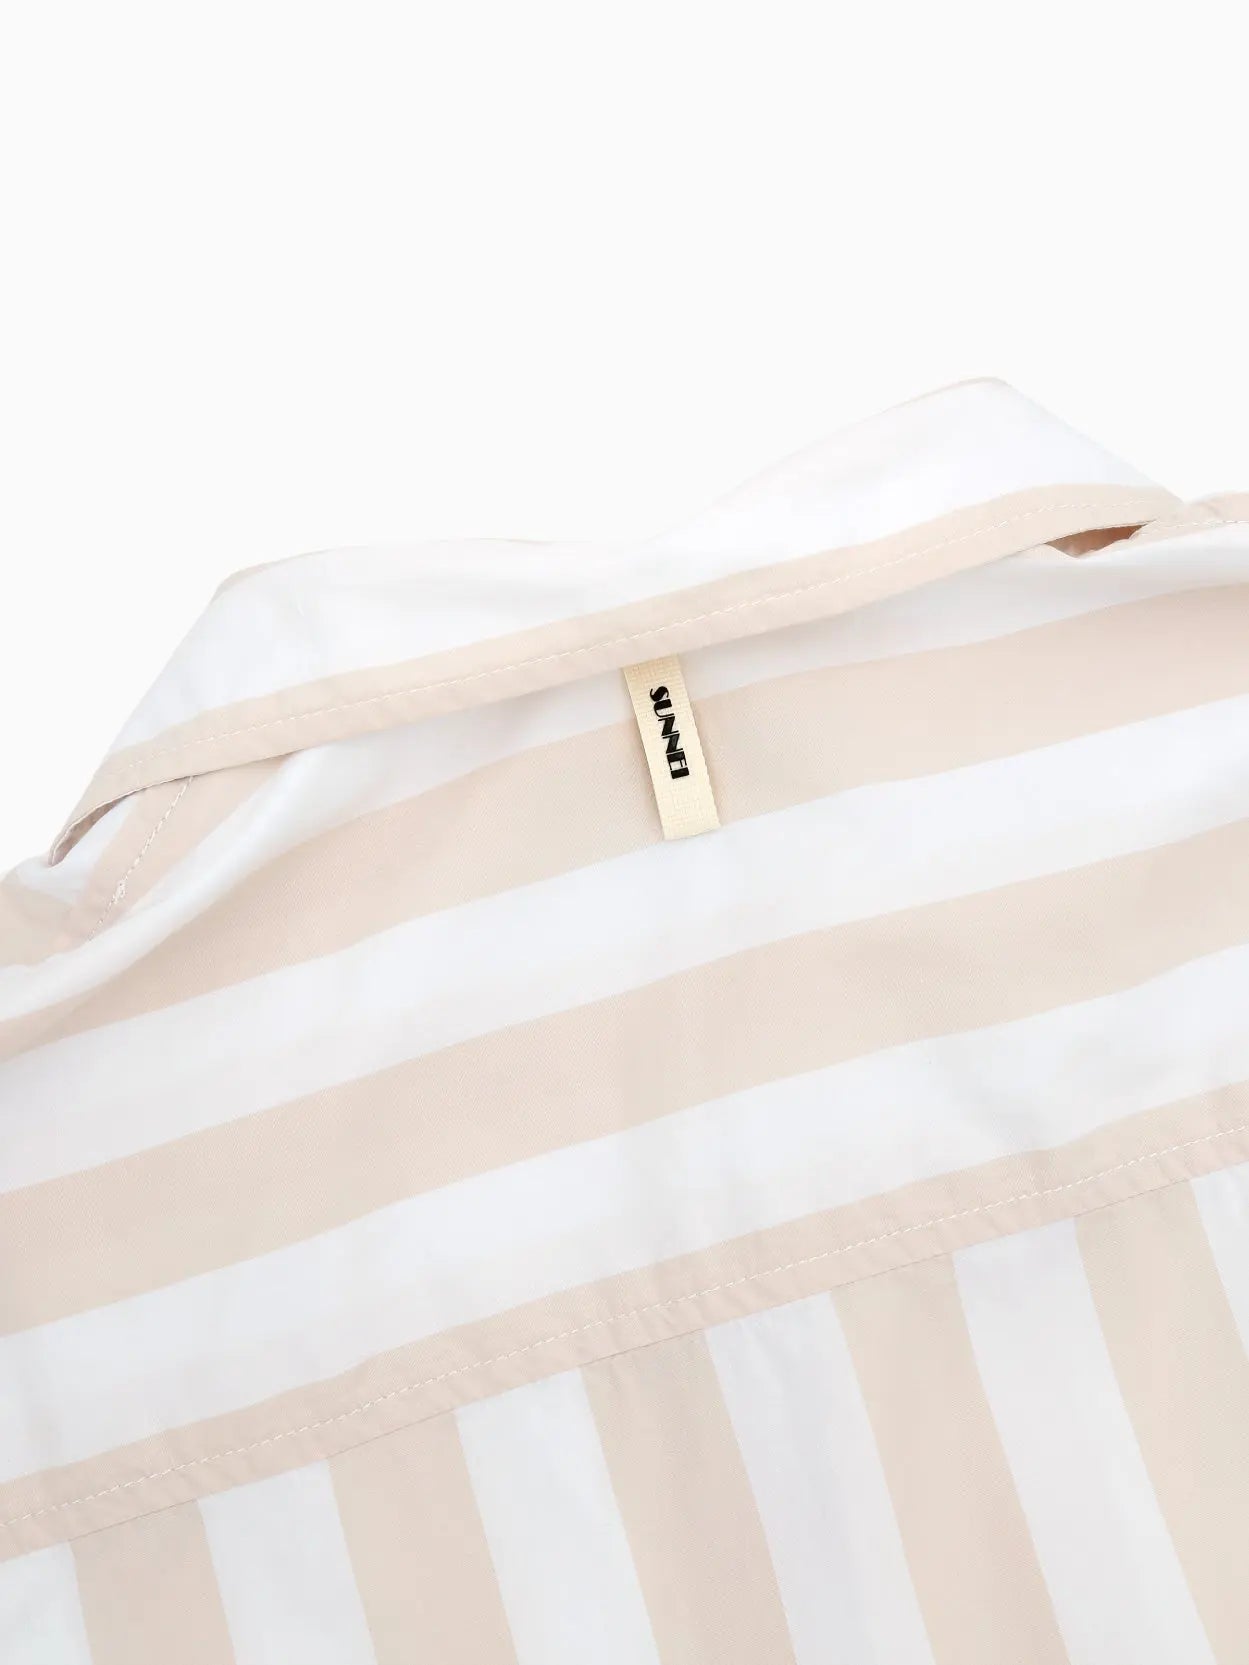 A short-sleeved, button-up shirt with vertical beige and white stripes. It features a spread collar and front buttons, creating a casual yet stylish look suitable for warm weather. Perfect for those sunny days in Barcelona, find the Short Sleeve Shirt Off White by Sunnei now at Bassalstore for your wardrobe refresh.